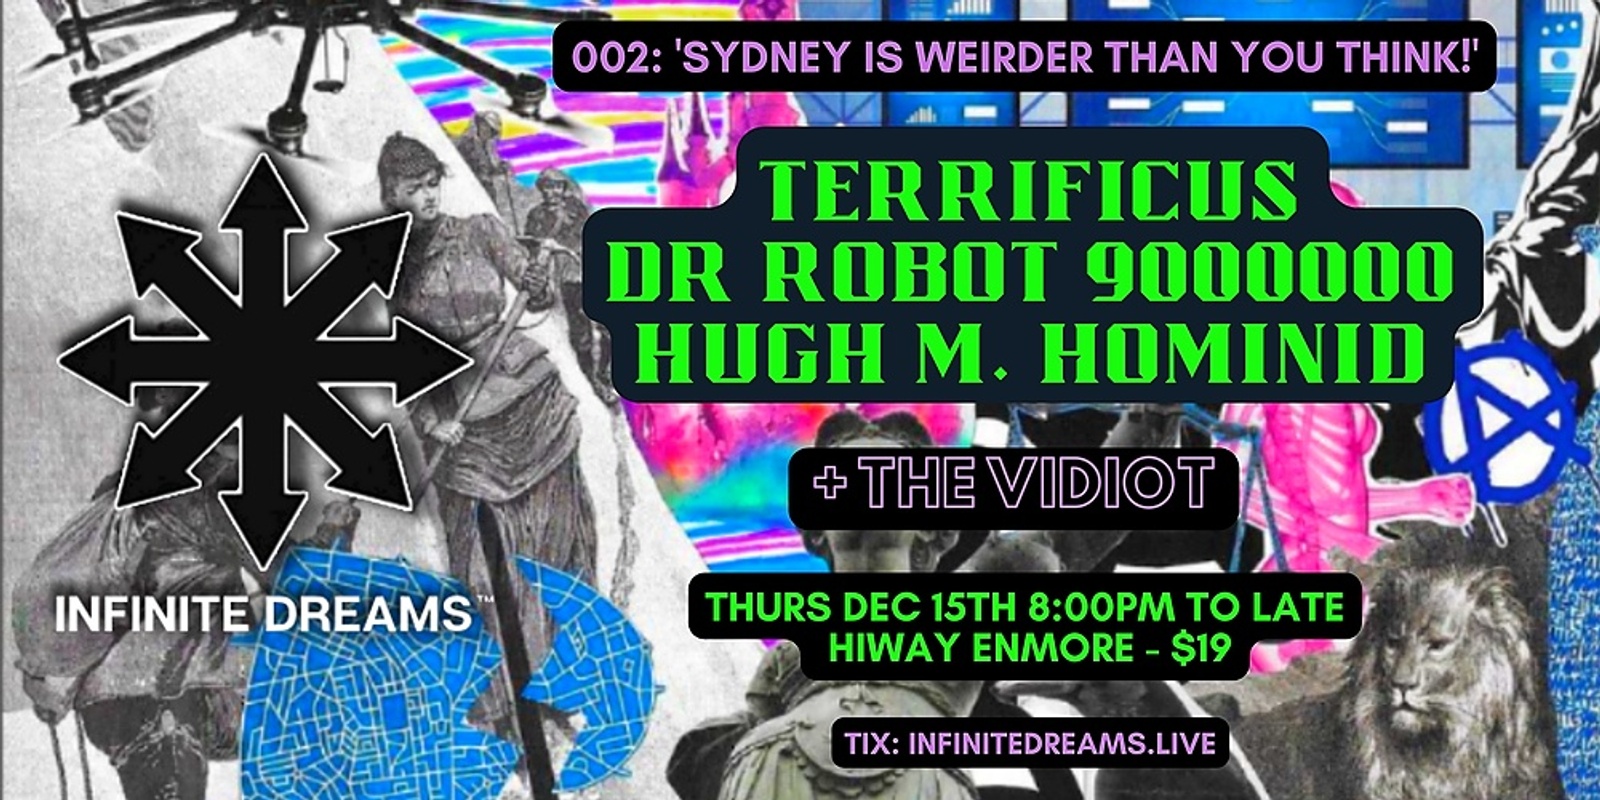 Banner image for Infinite Dreams 002: Sydney Is Weirder Than You Think! 